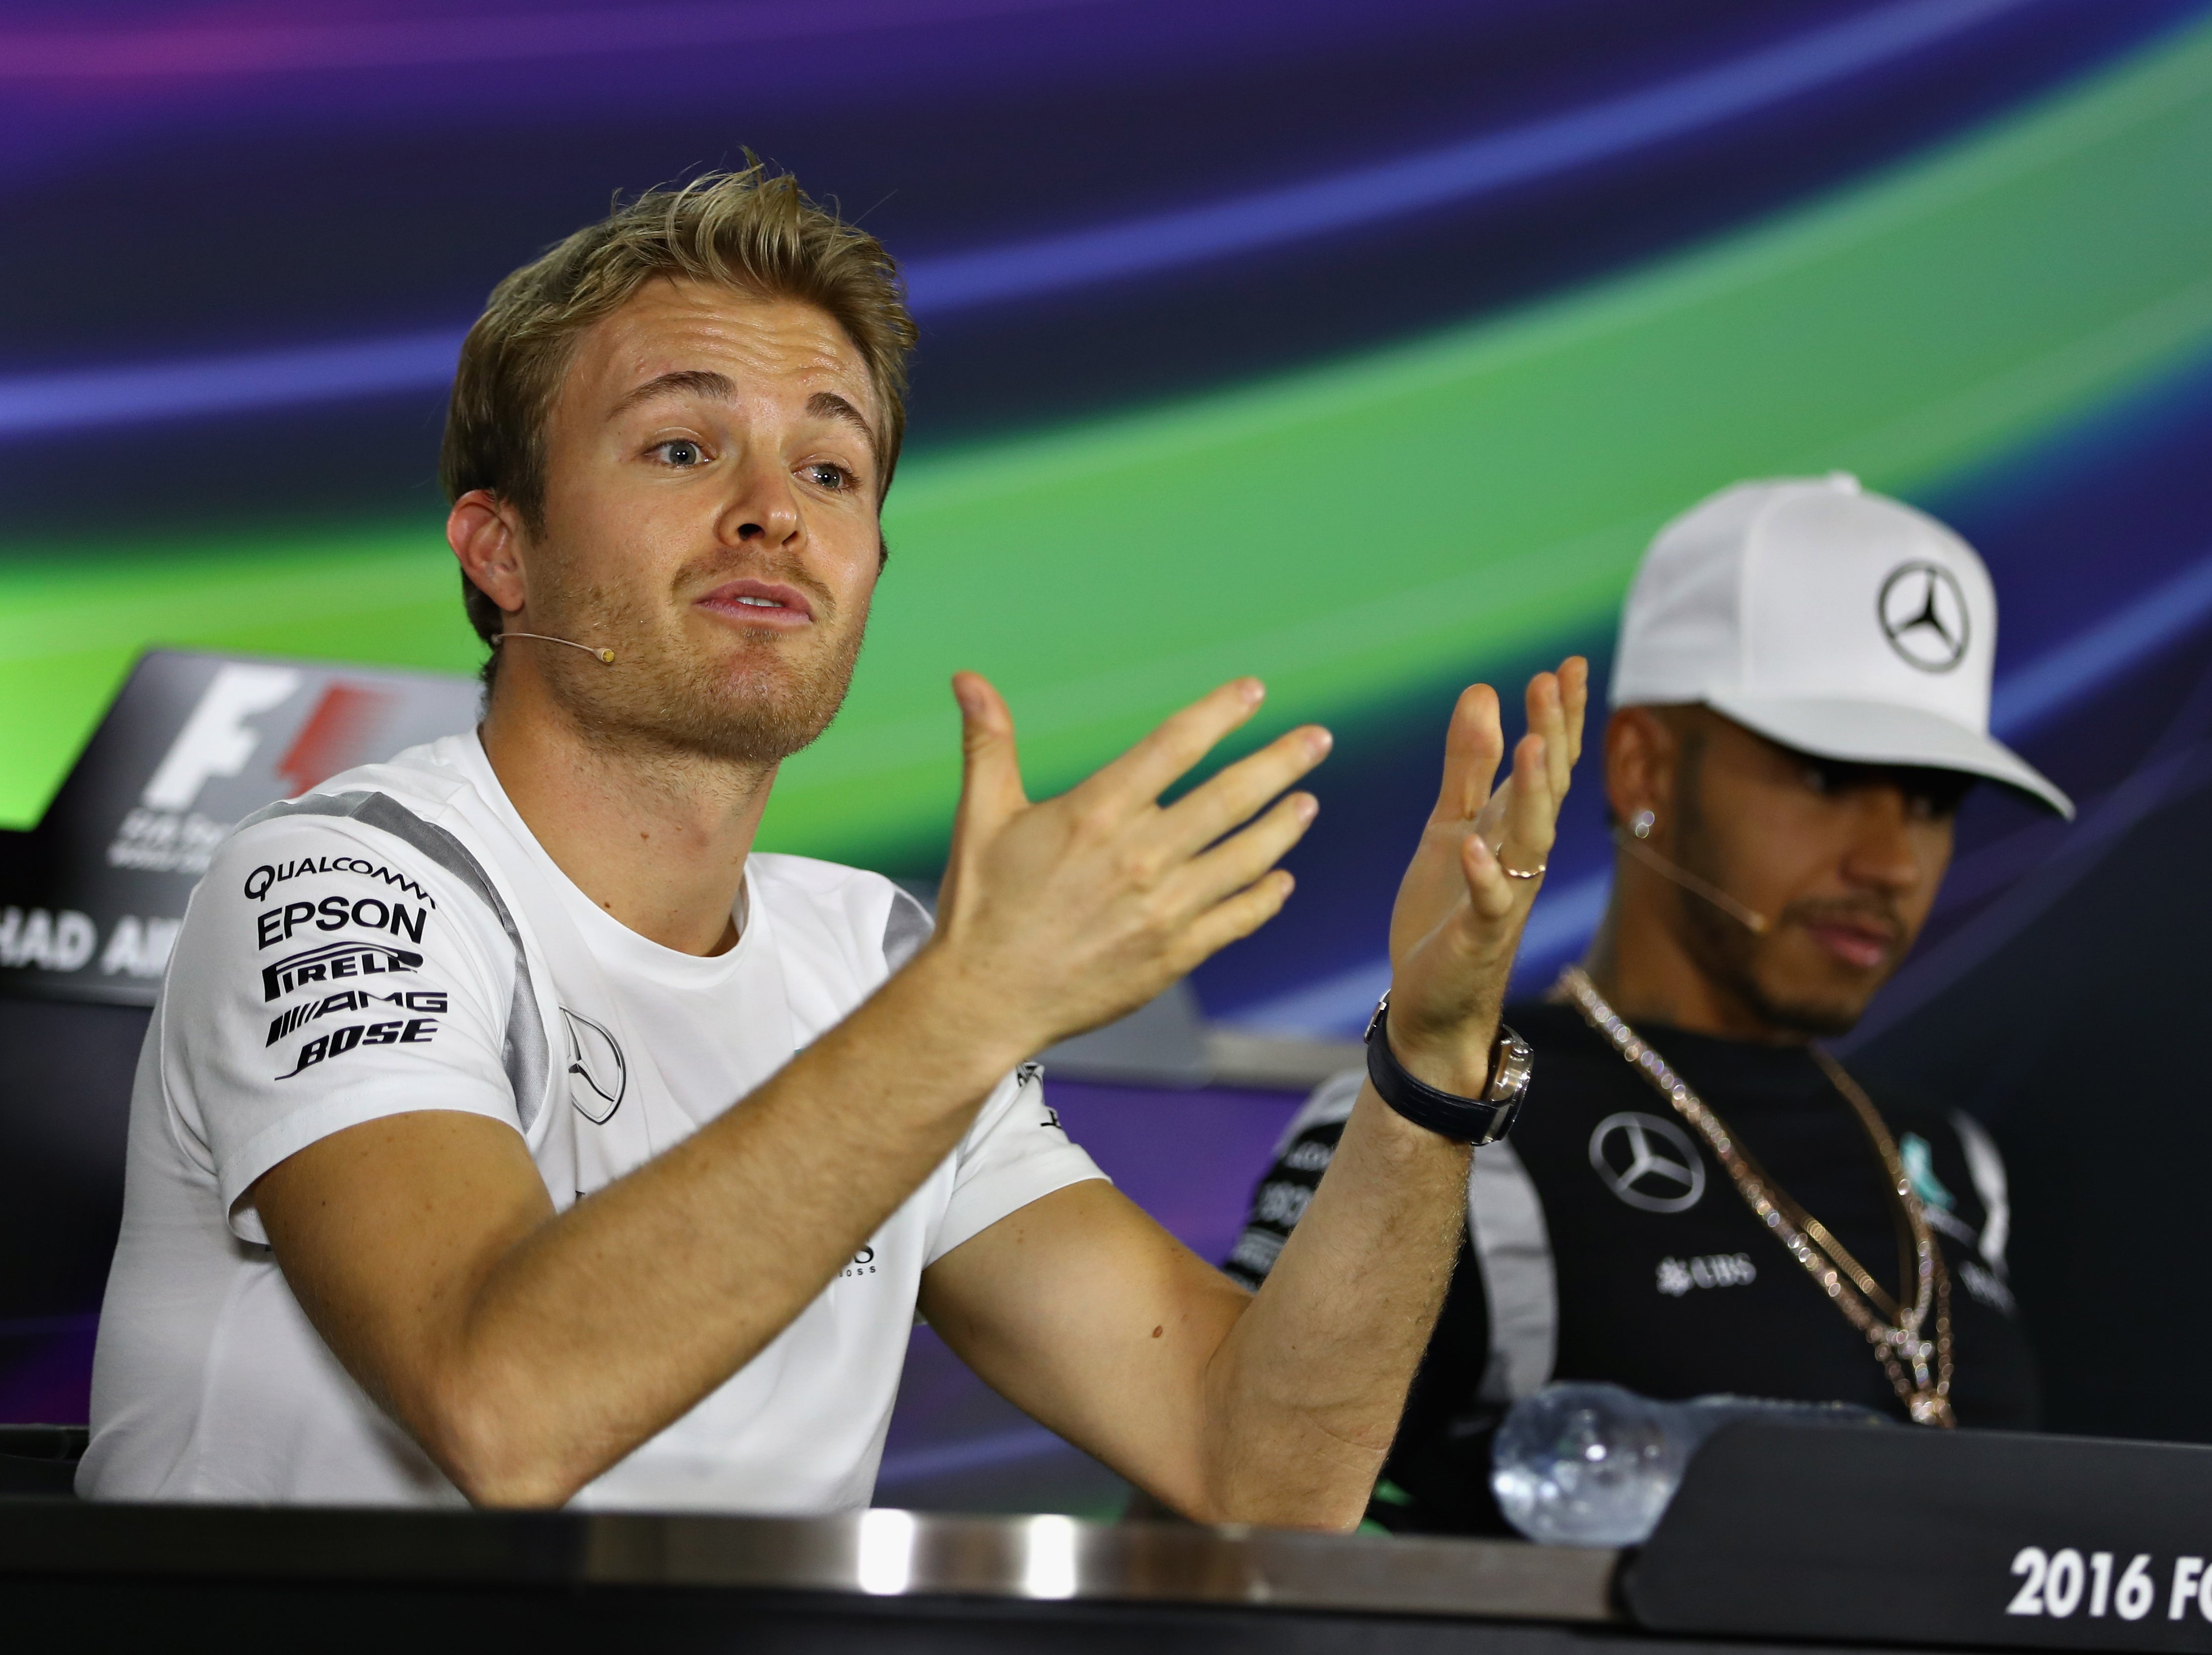 Nico Rosberg beat Lewis Hamilton to the F1 title in 2016